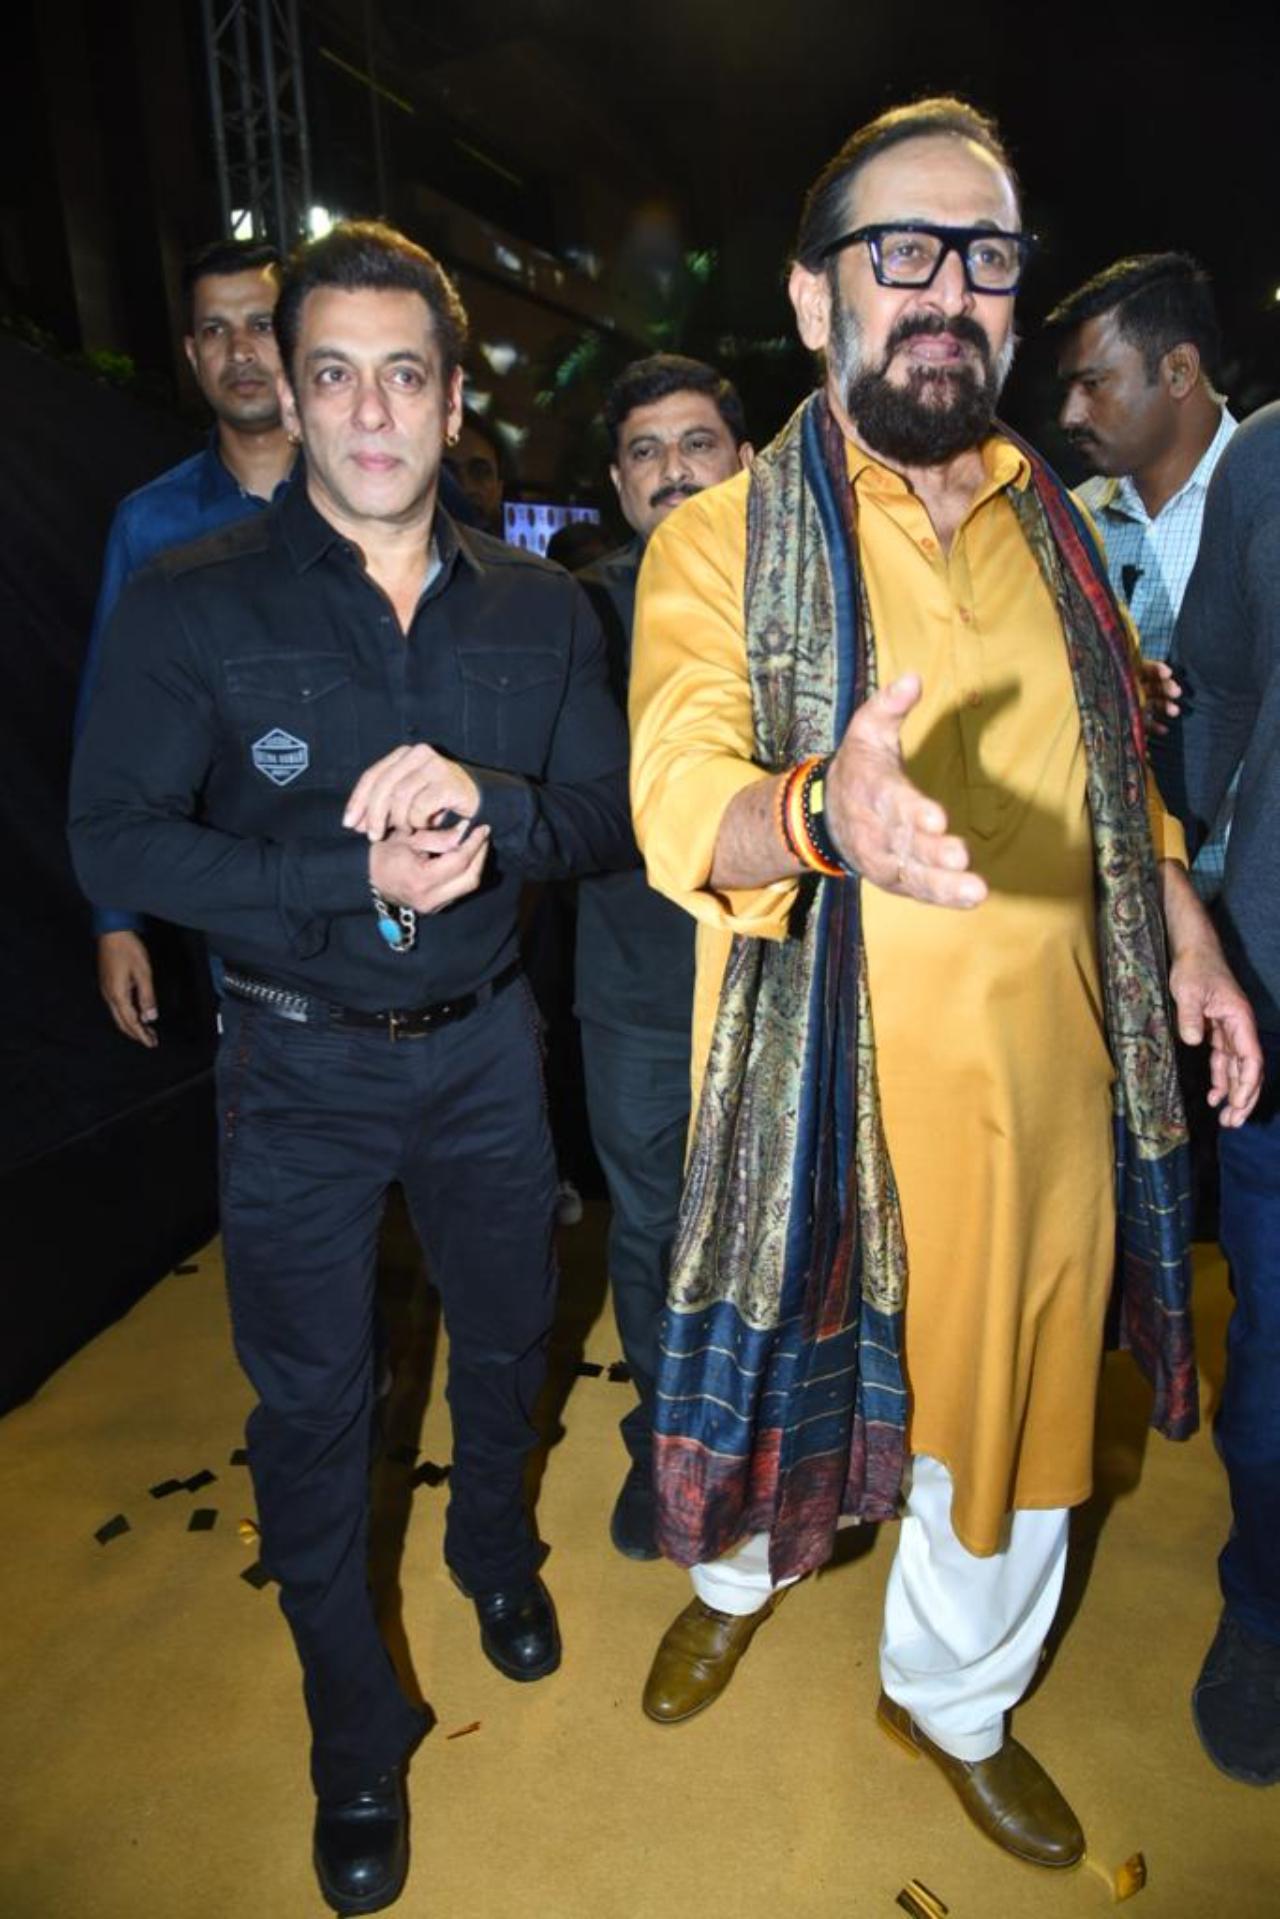 Salman Khan, a close friend of Mahesh Manjrekar, was also present at the launch event to show his support to his friend. Mahesh Manjrekar has directed Salman Khan in the recently released film Antim. The two have also worked as co-actors in multiple films